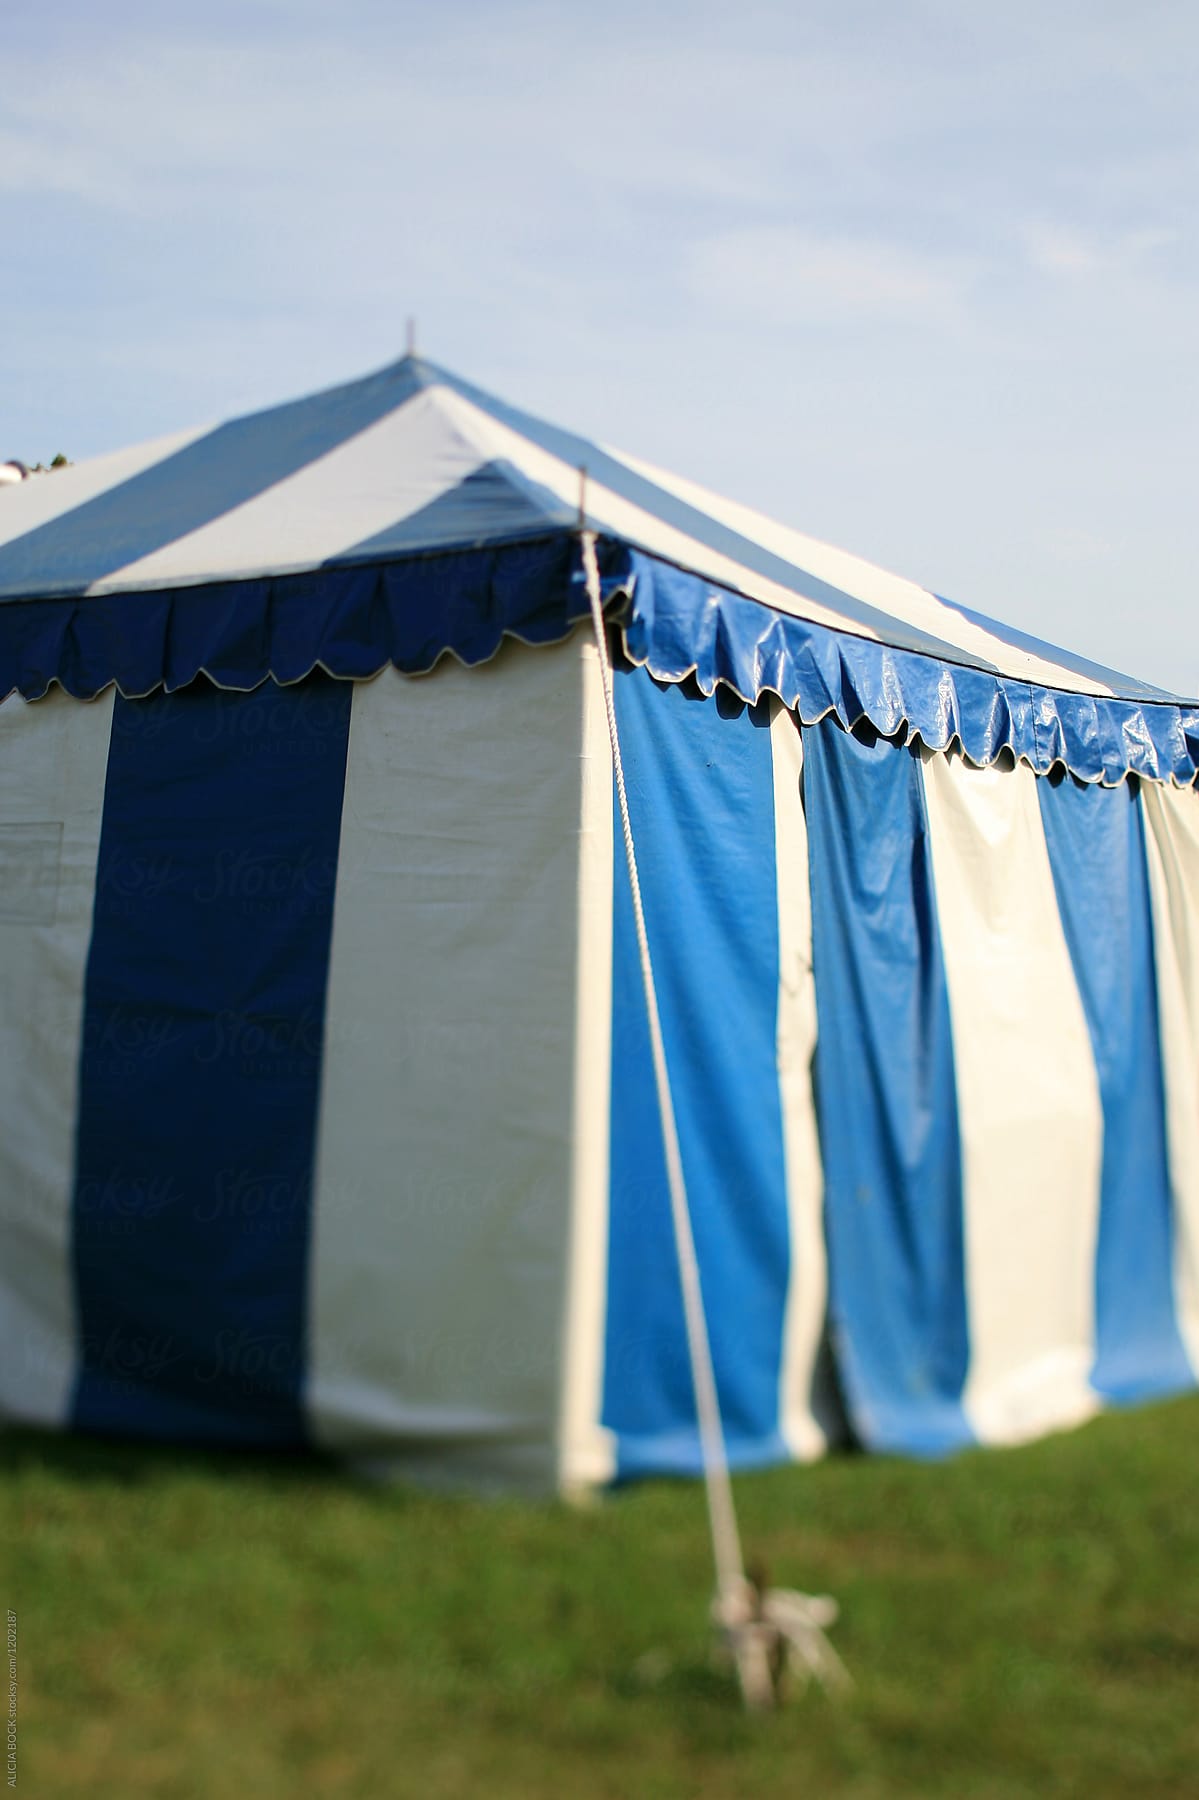 A Blue And White Striped Circus Tent